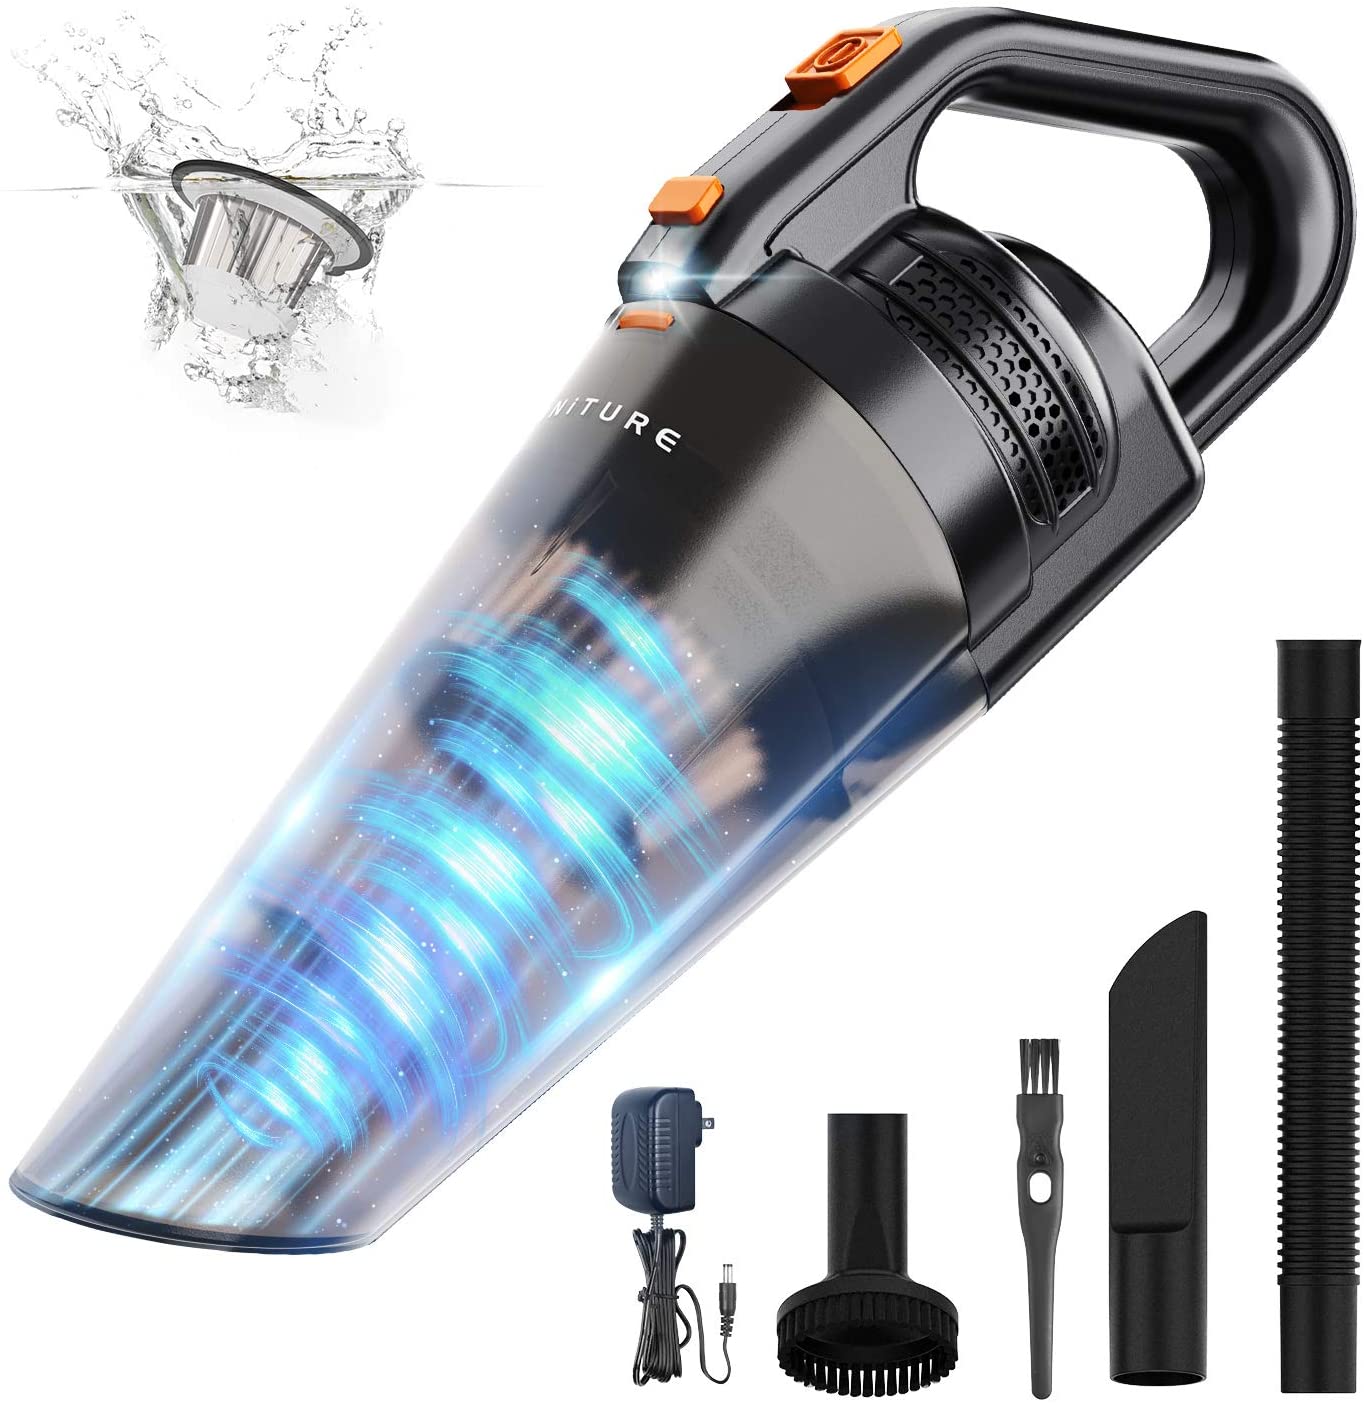 HONITURE Handheld Vacuum Cleaner Cordless,9000PA Rechargeable Handheld vacuums,Powerful Cyclone Suction,3H Charge,Portable Hand Held car Vacuum,Wet Dry Vacuums with LED for Pet Hair,Home